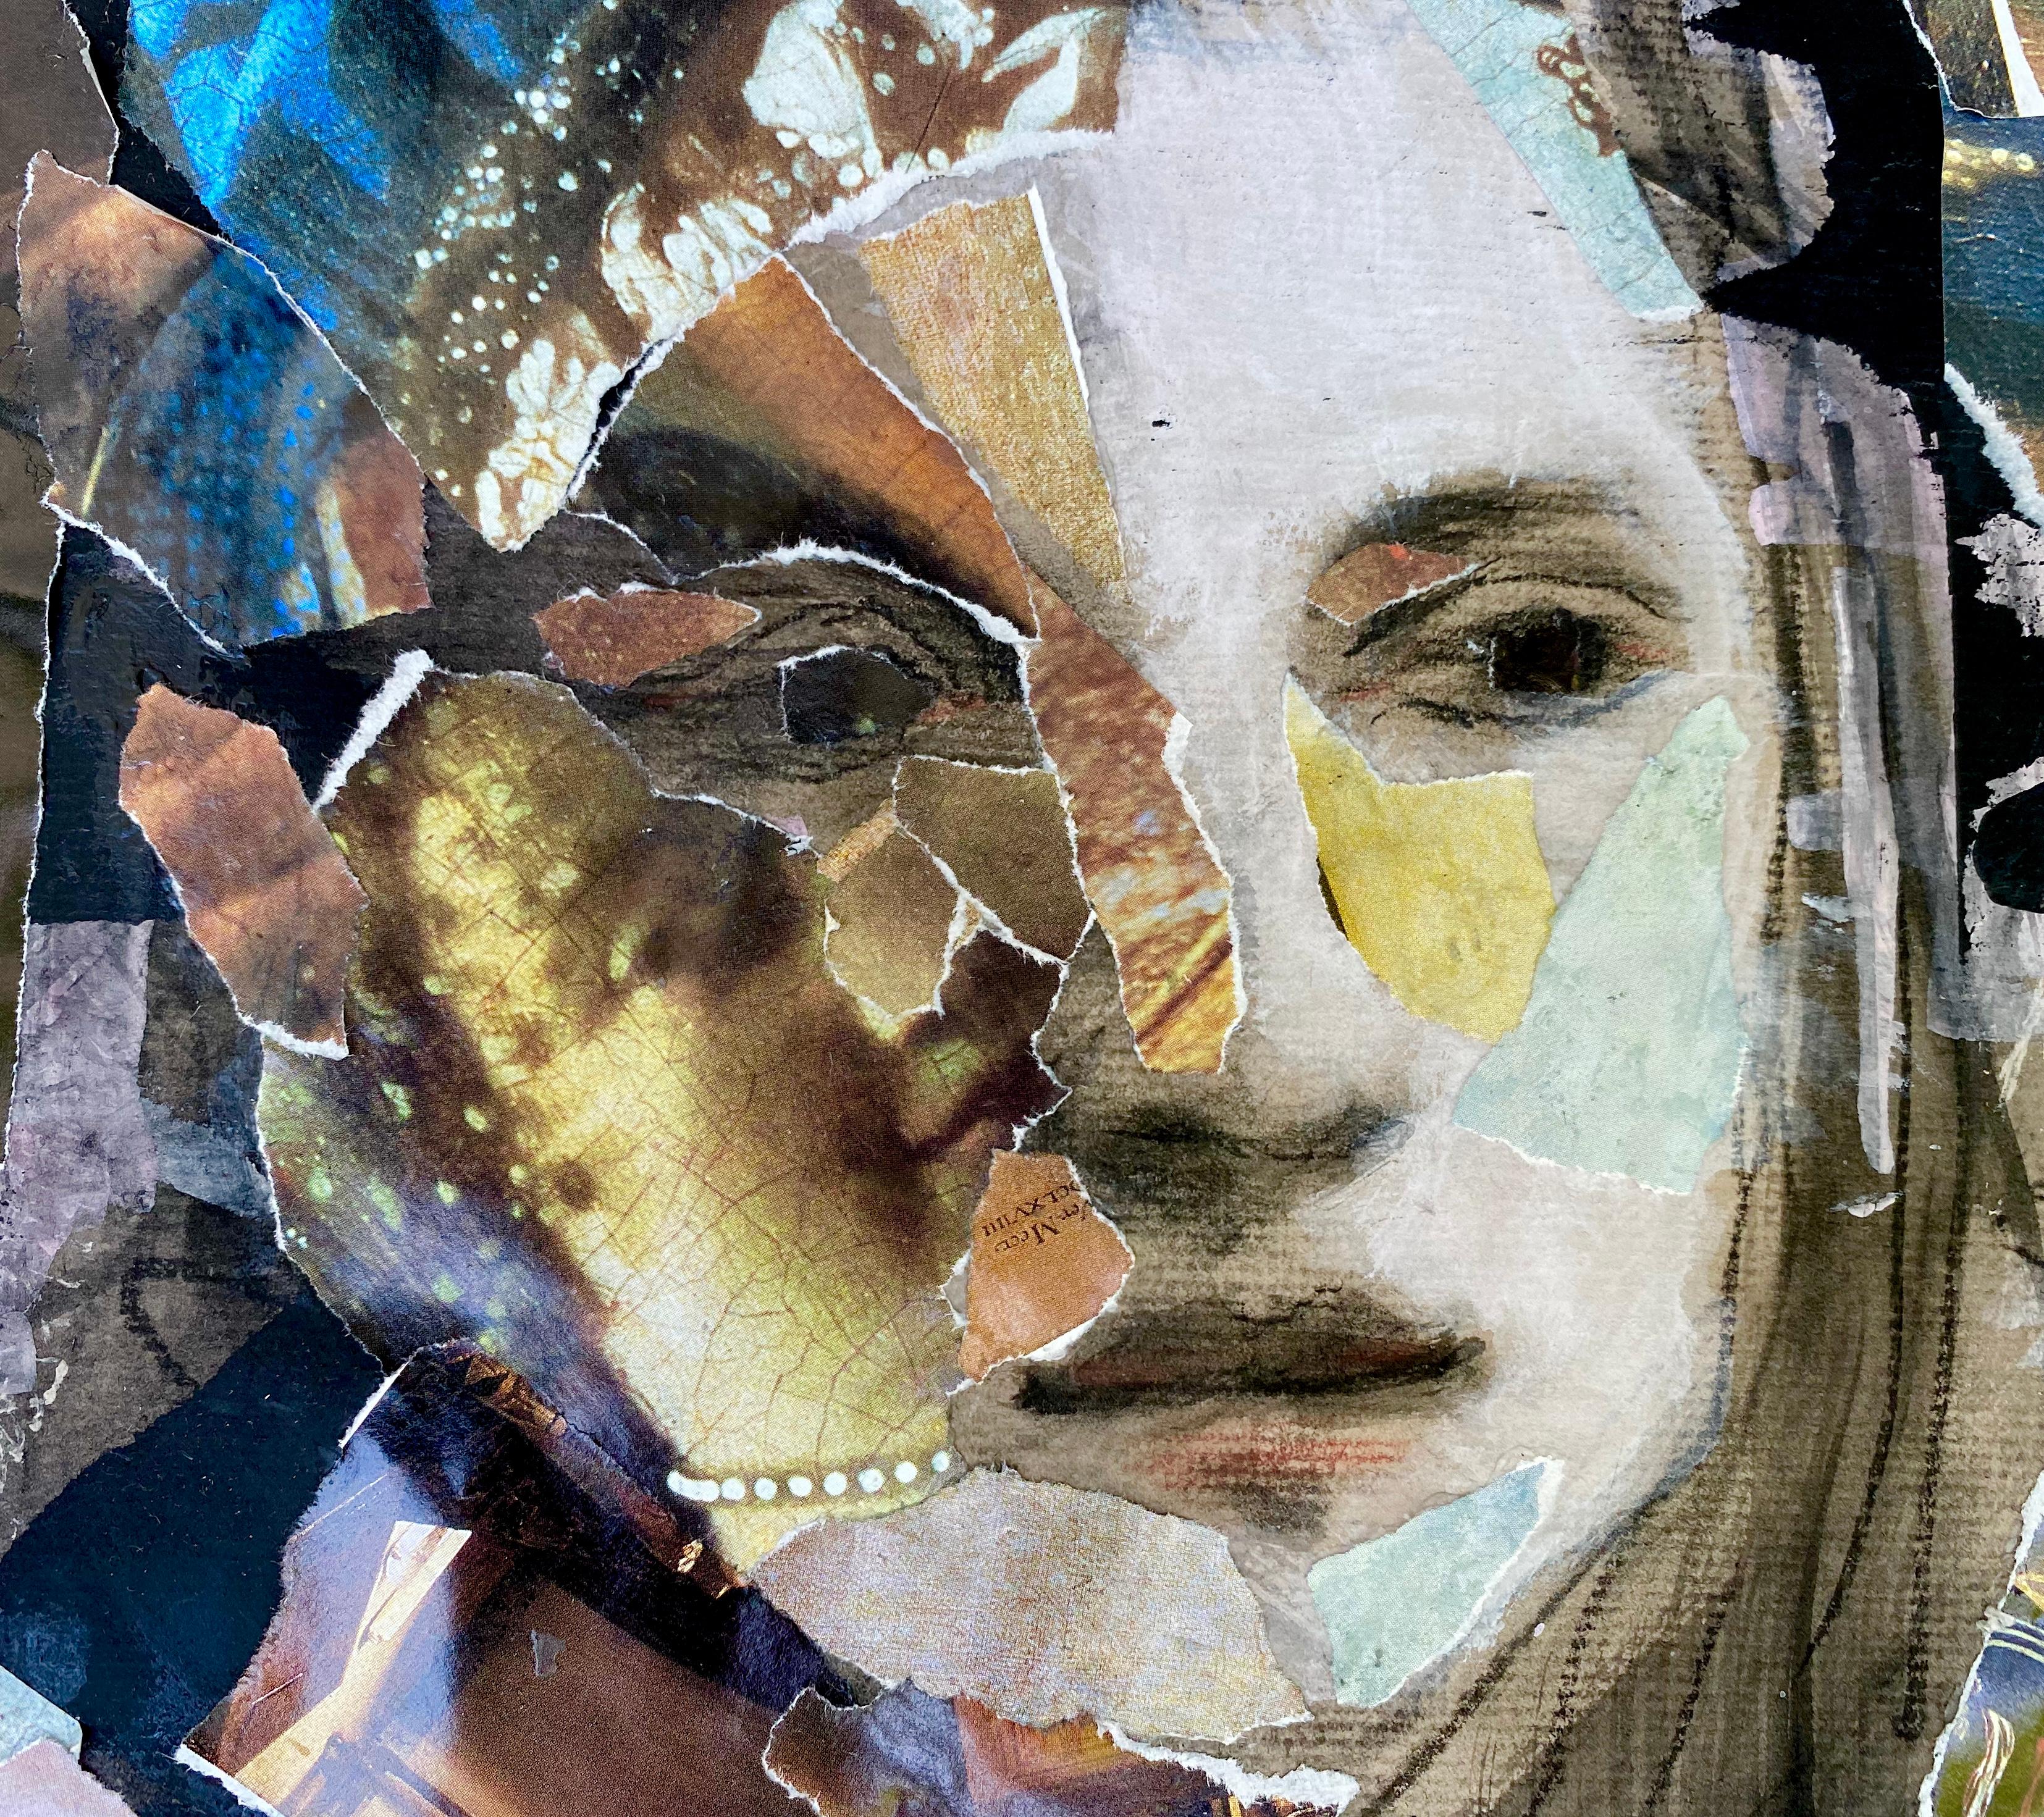 Vermeer Tapestry, collage with classical elements, disrupted realism - Art by Audrey Anastasi